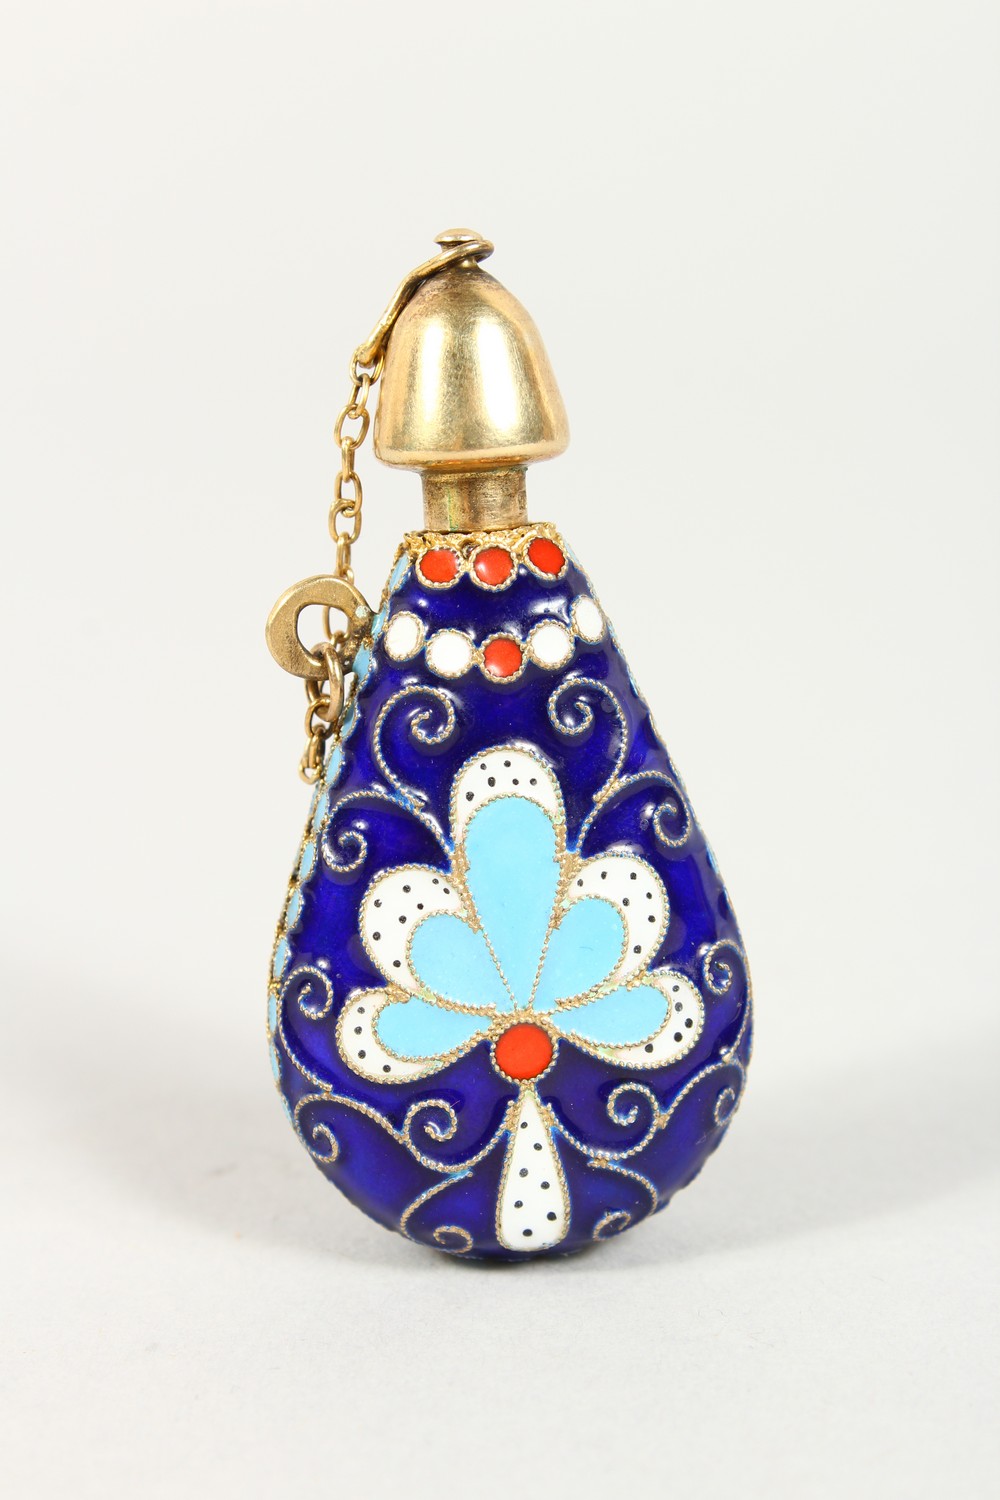 A SMALL RUSSIAN ENAMEL SCENT BOTTLE. 2.5ins. - Image 3 of 8